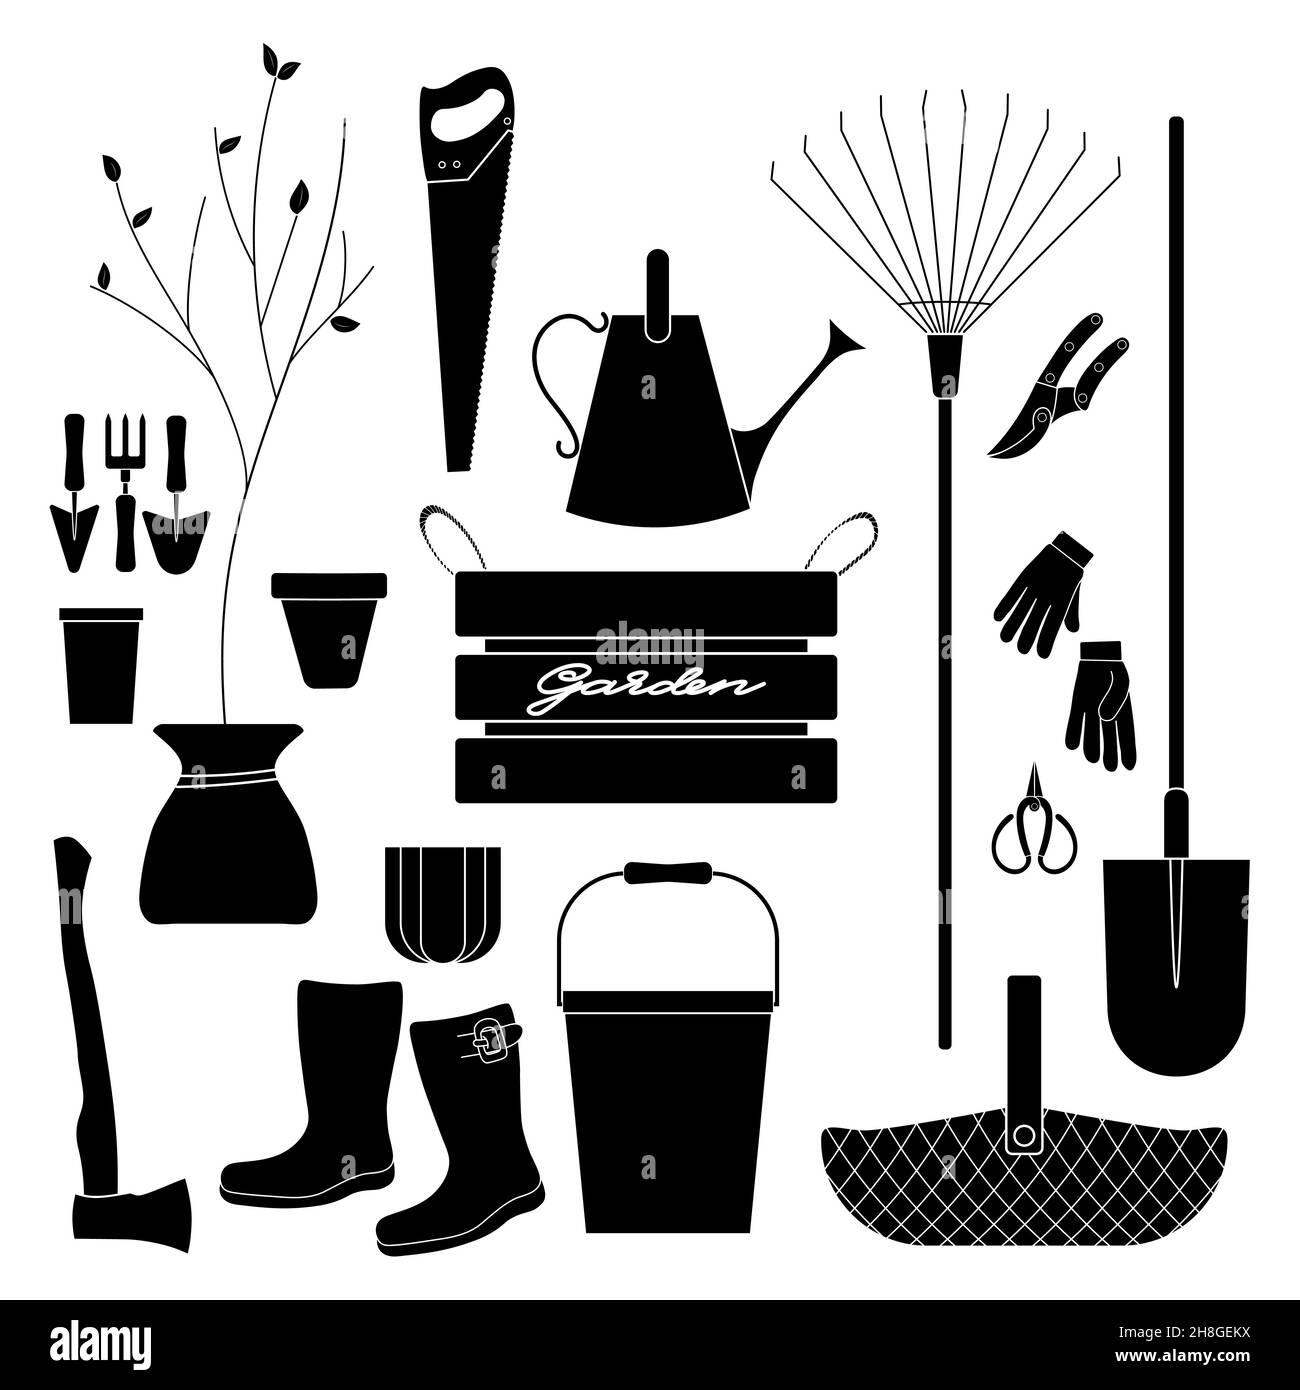 Gardening tools set negative outline simple minimalistic flat design icon vector illustration isolated on white background Stock Vector